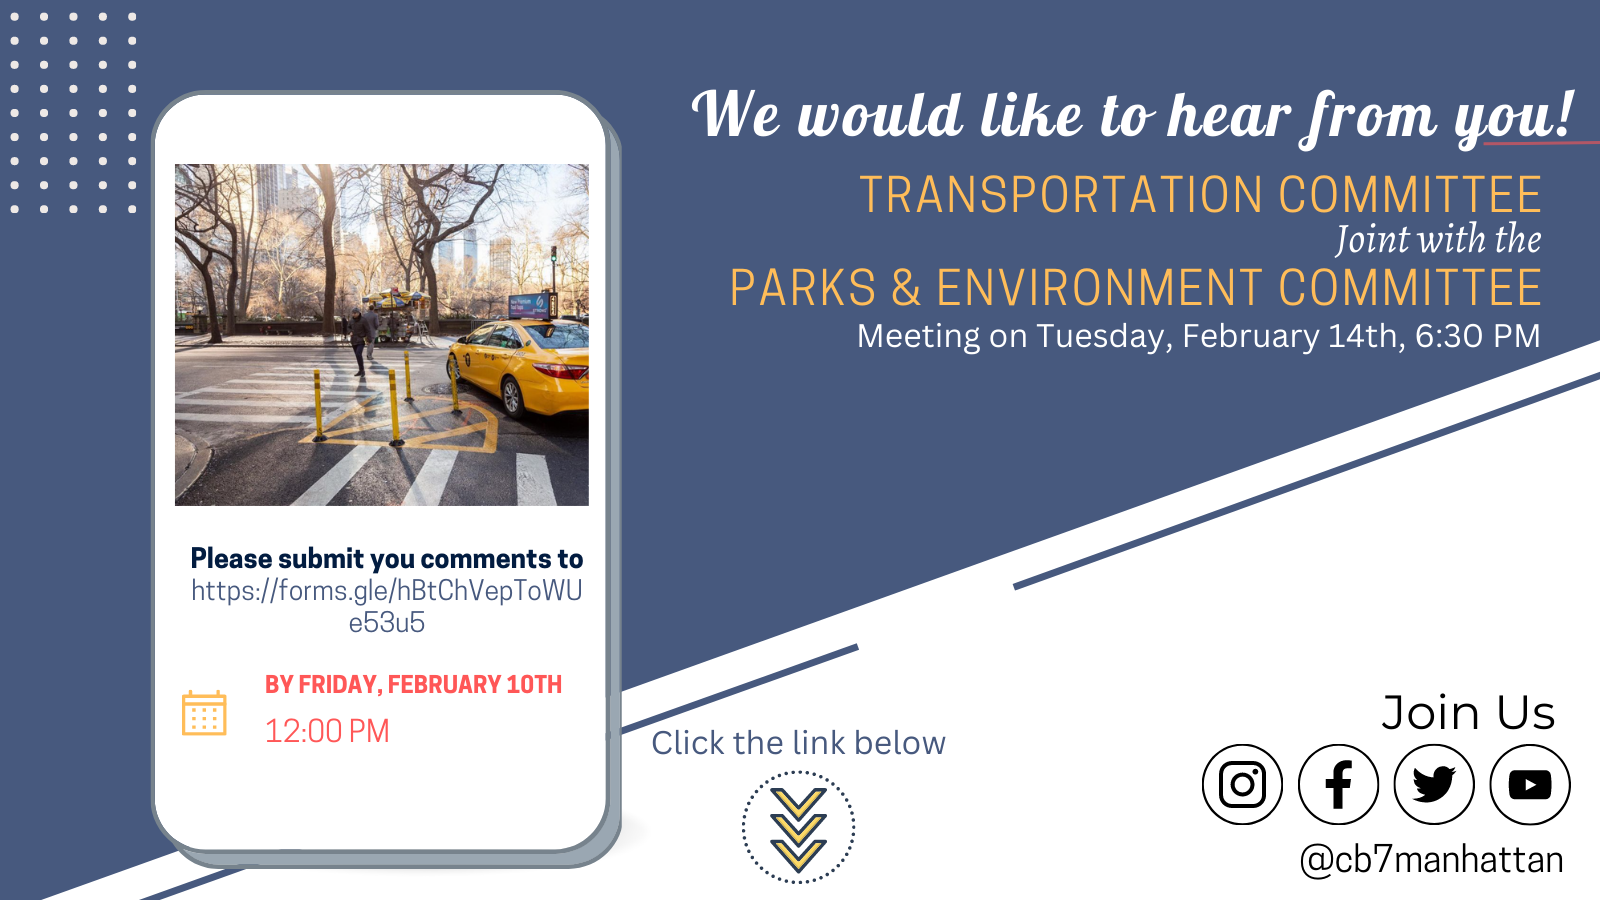 MCB7 Transportation Committee joint with Parks & Environment Committee: Survey